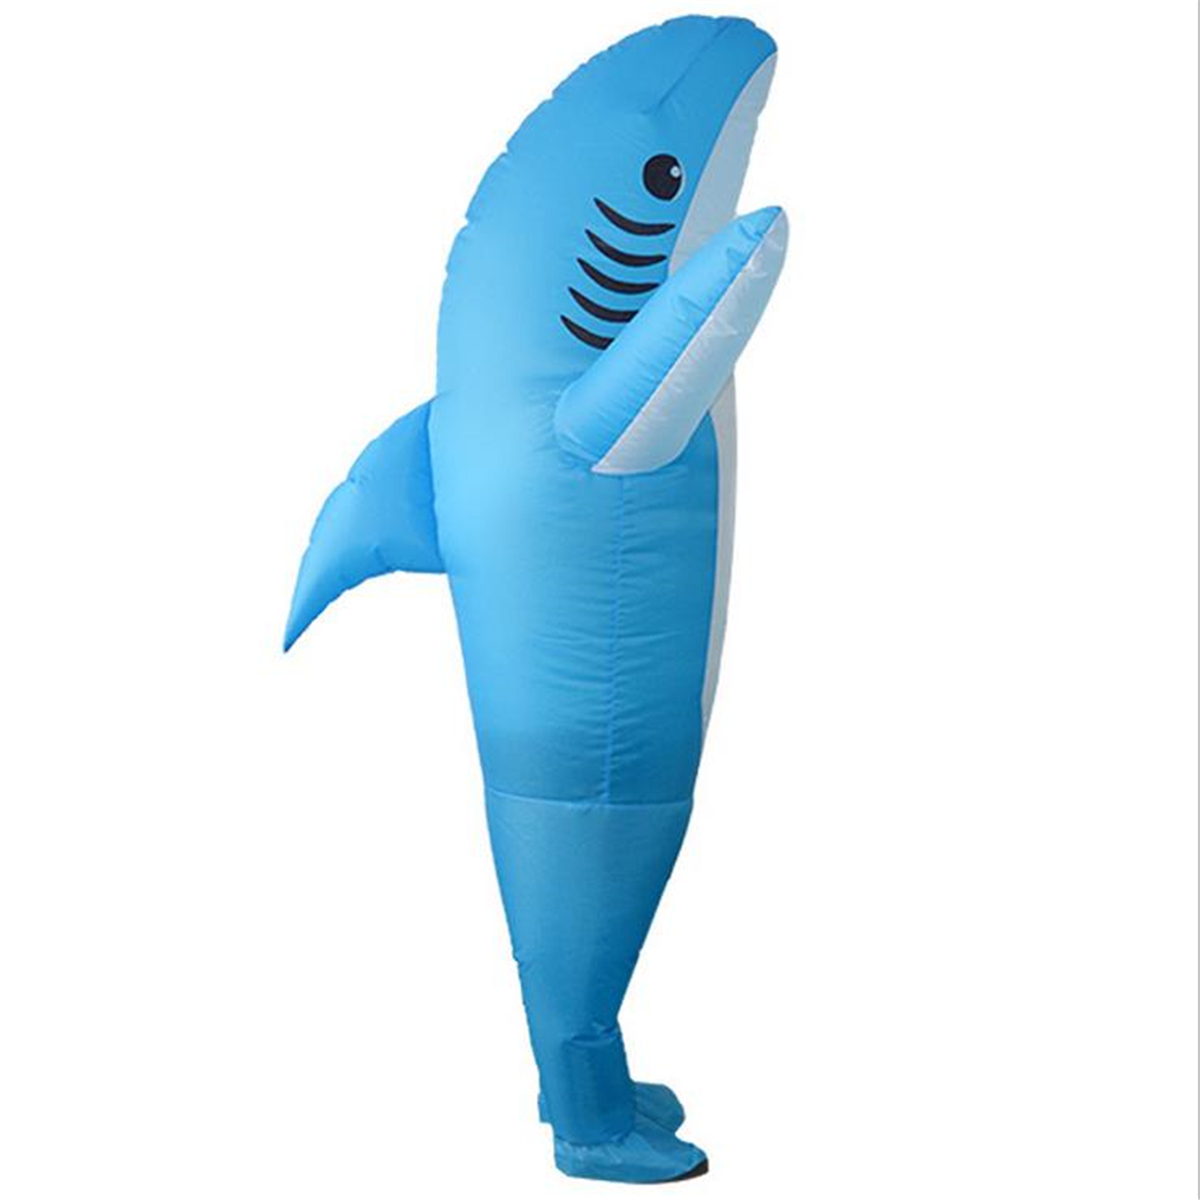 Inflatable Costumes Shark Adult Halloween Fancy Dress Funny Scary Dress Costume 10